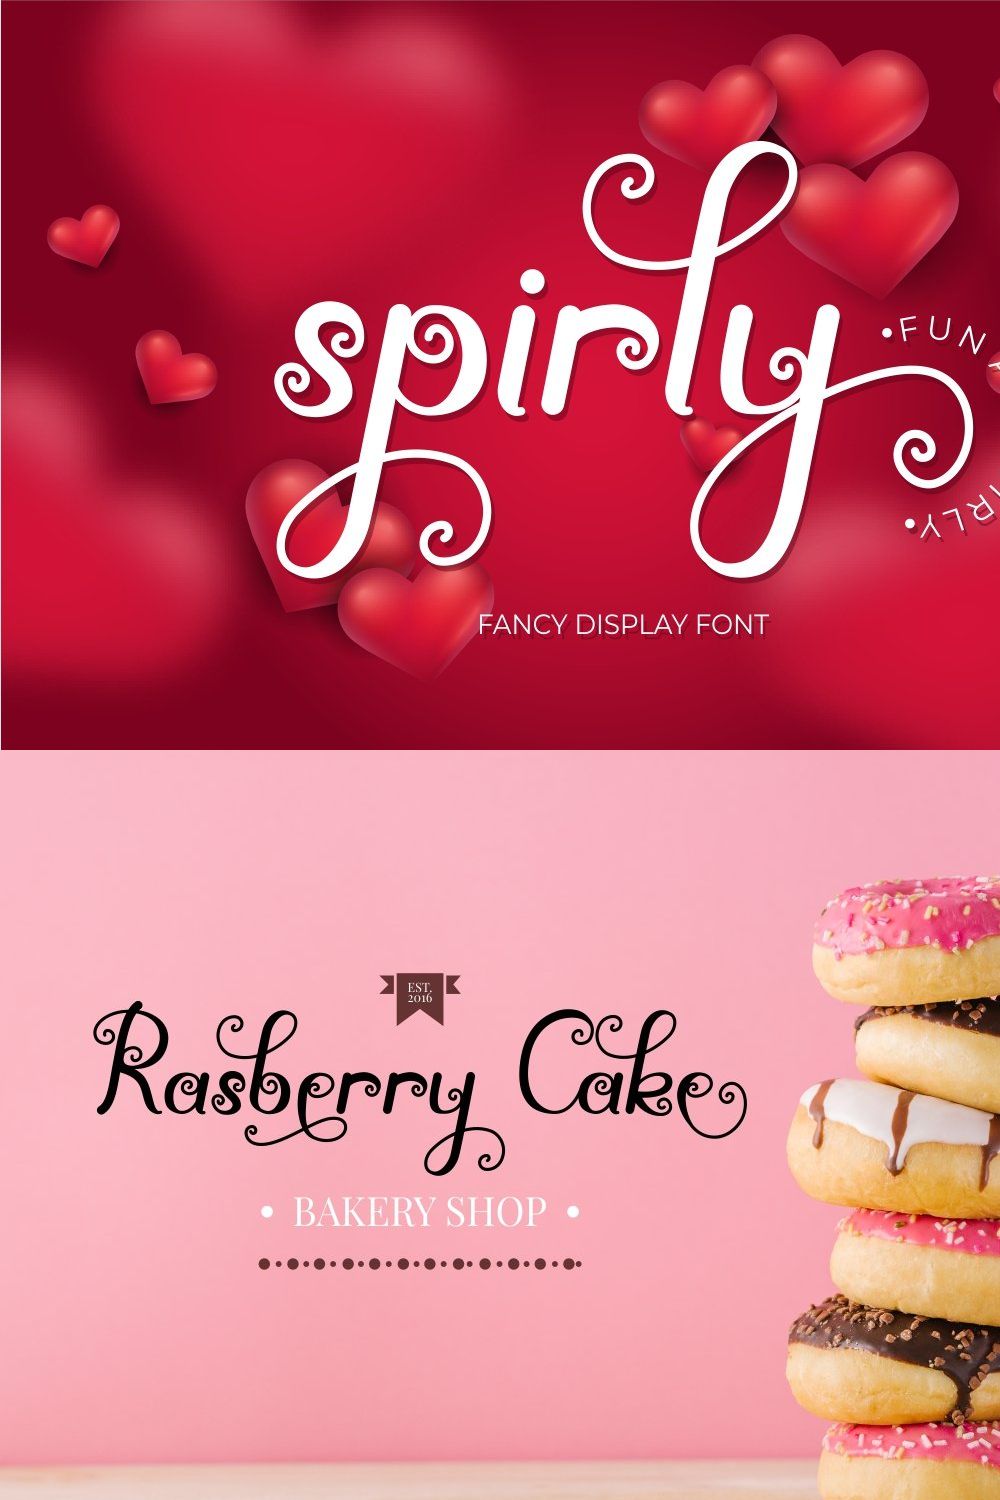 Spirly pinterest preview image.